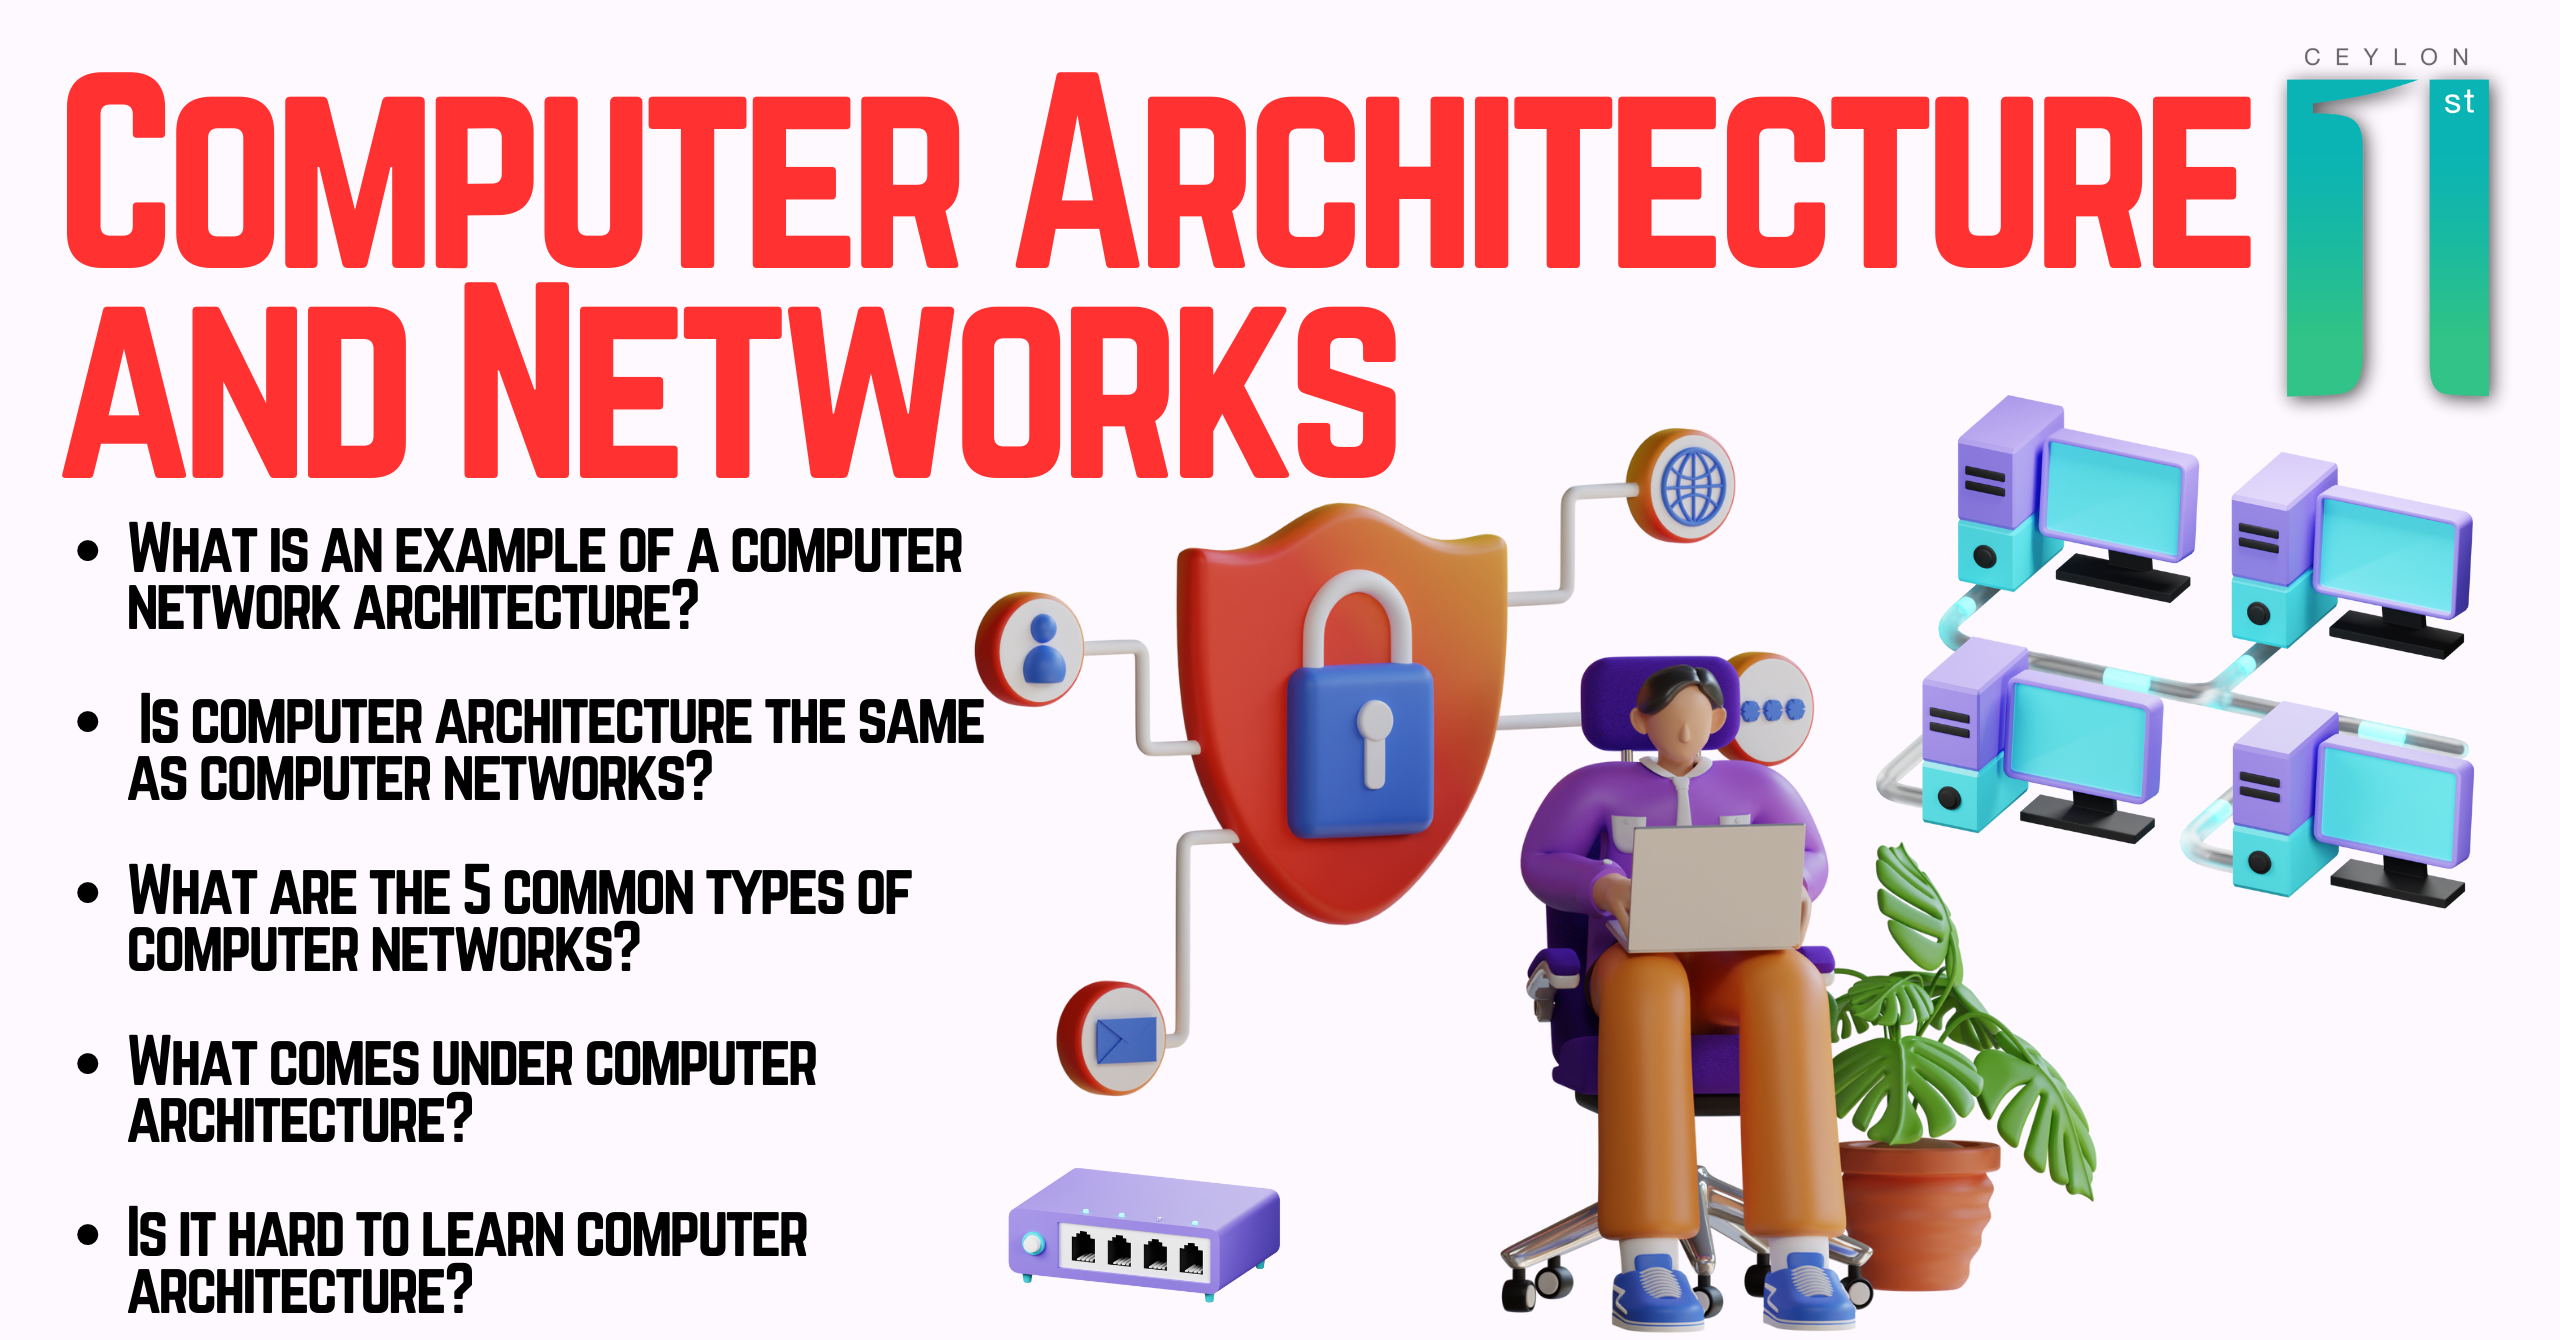 Computer Architecture and Networks